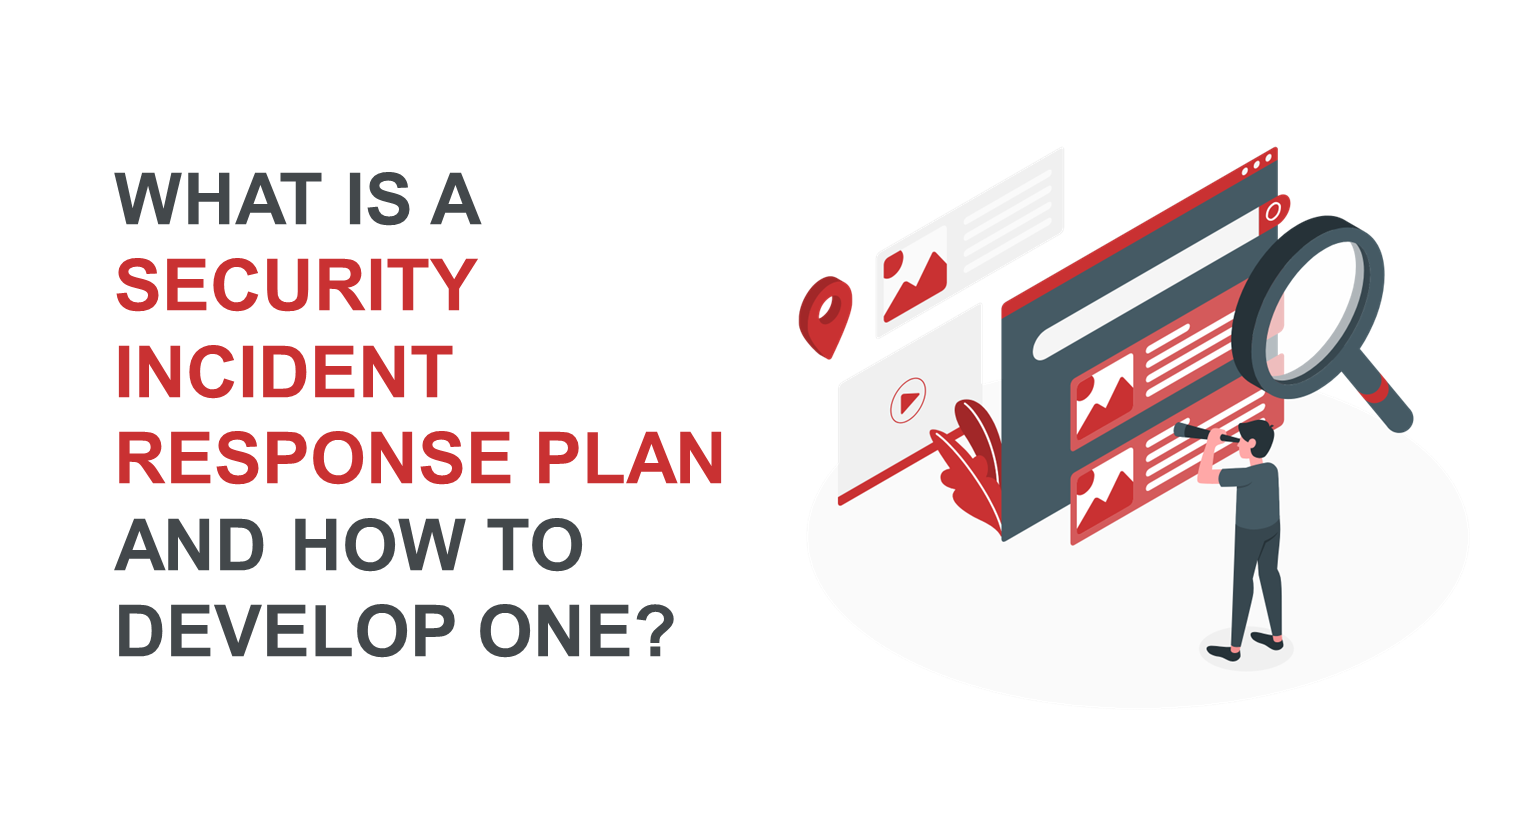 What is a Security Incident Response Plan and How to Develop One?